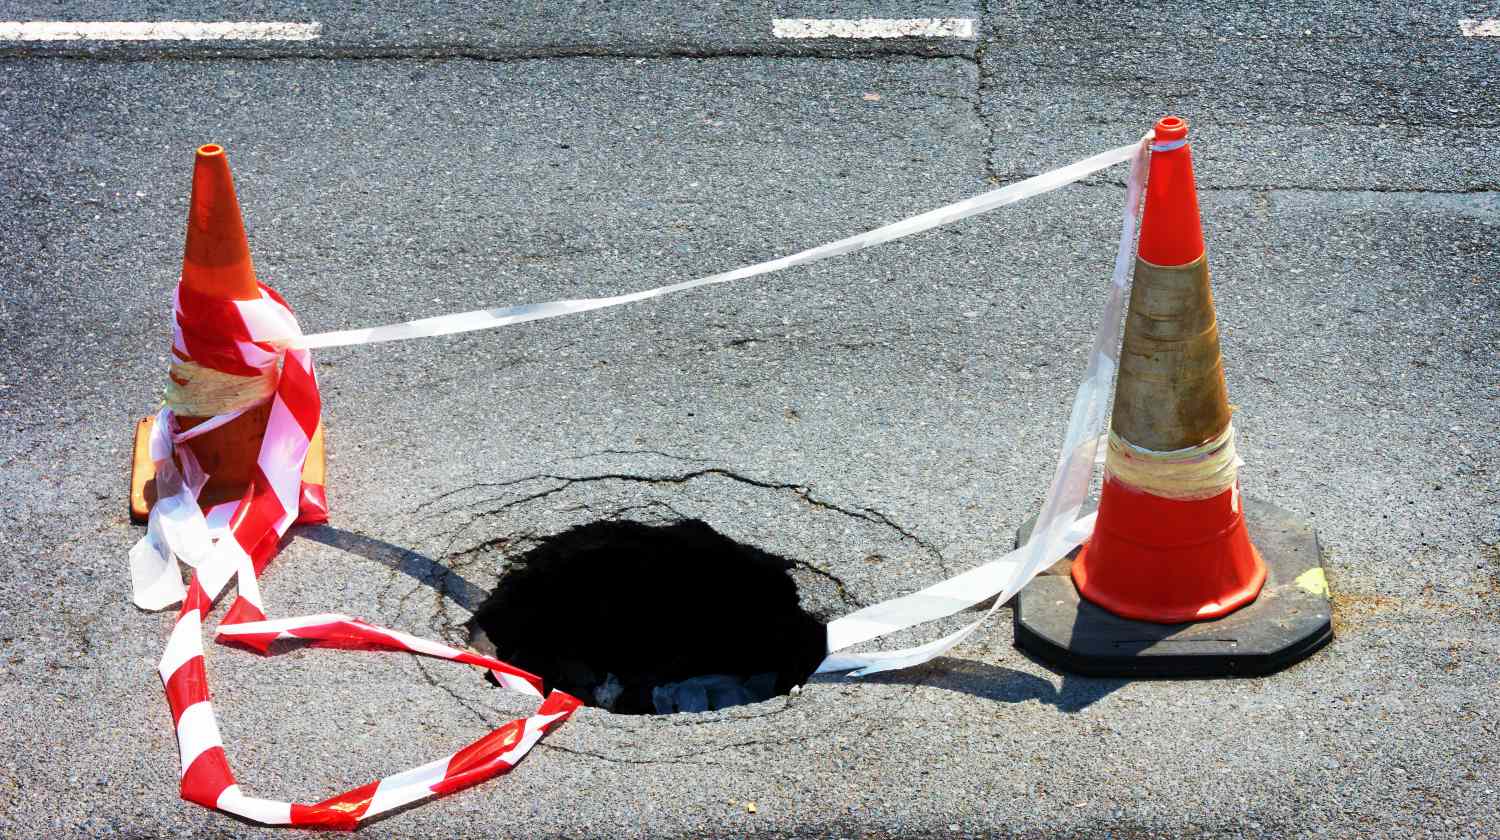 Feature | Road hole with warning cones and tape | Sinkholes Survival Life Tips | How To Prepare For The Worst